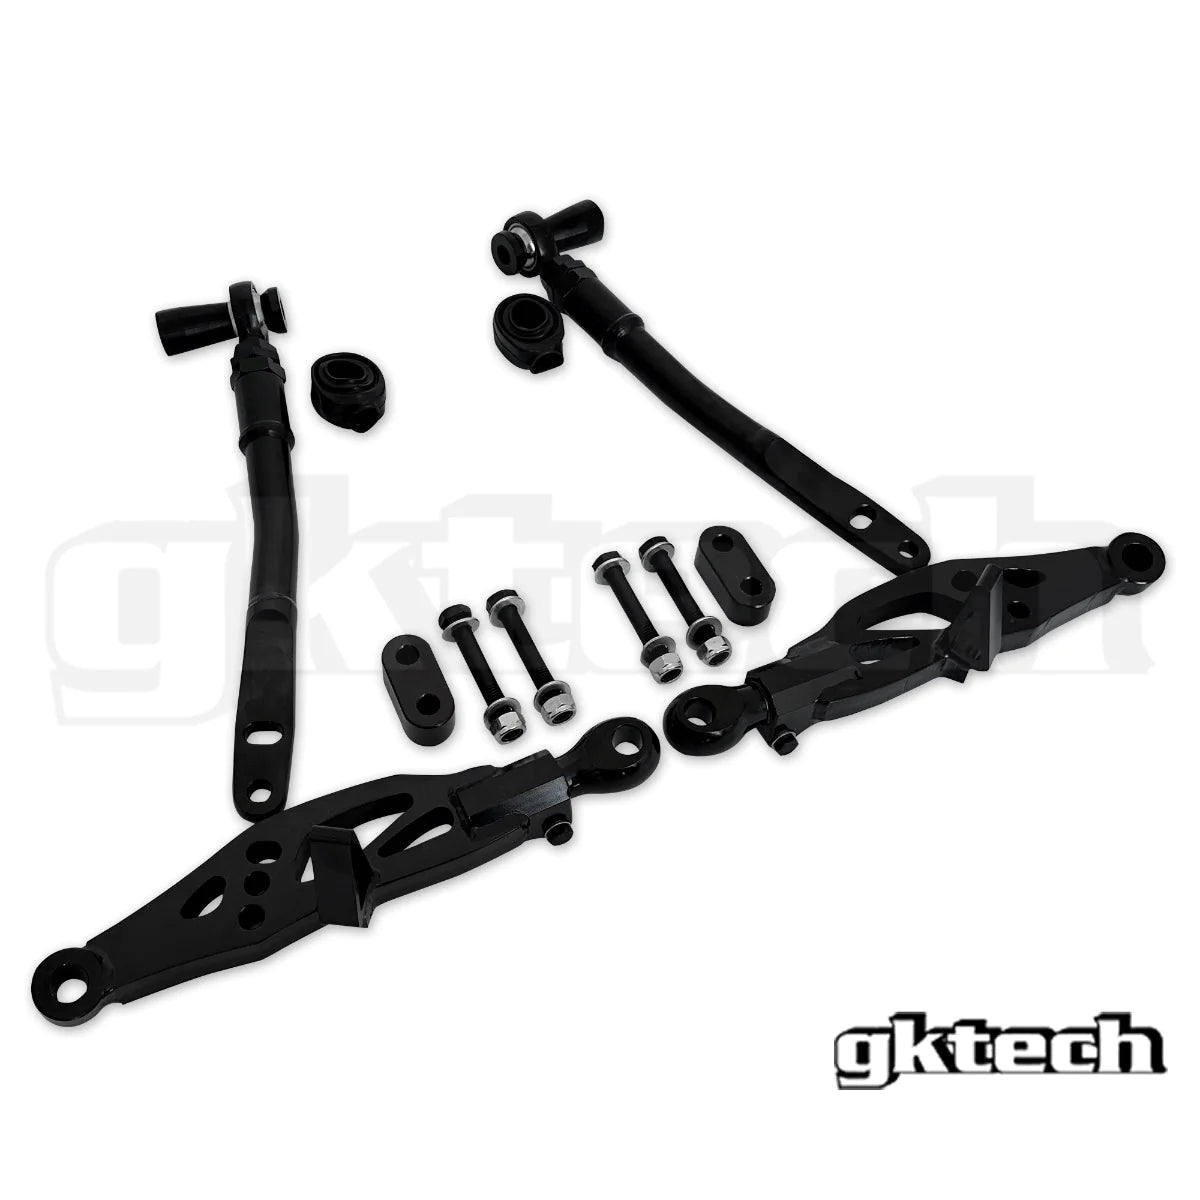 R32/R33 Skyline GT-R front lower control arms